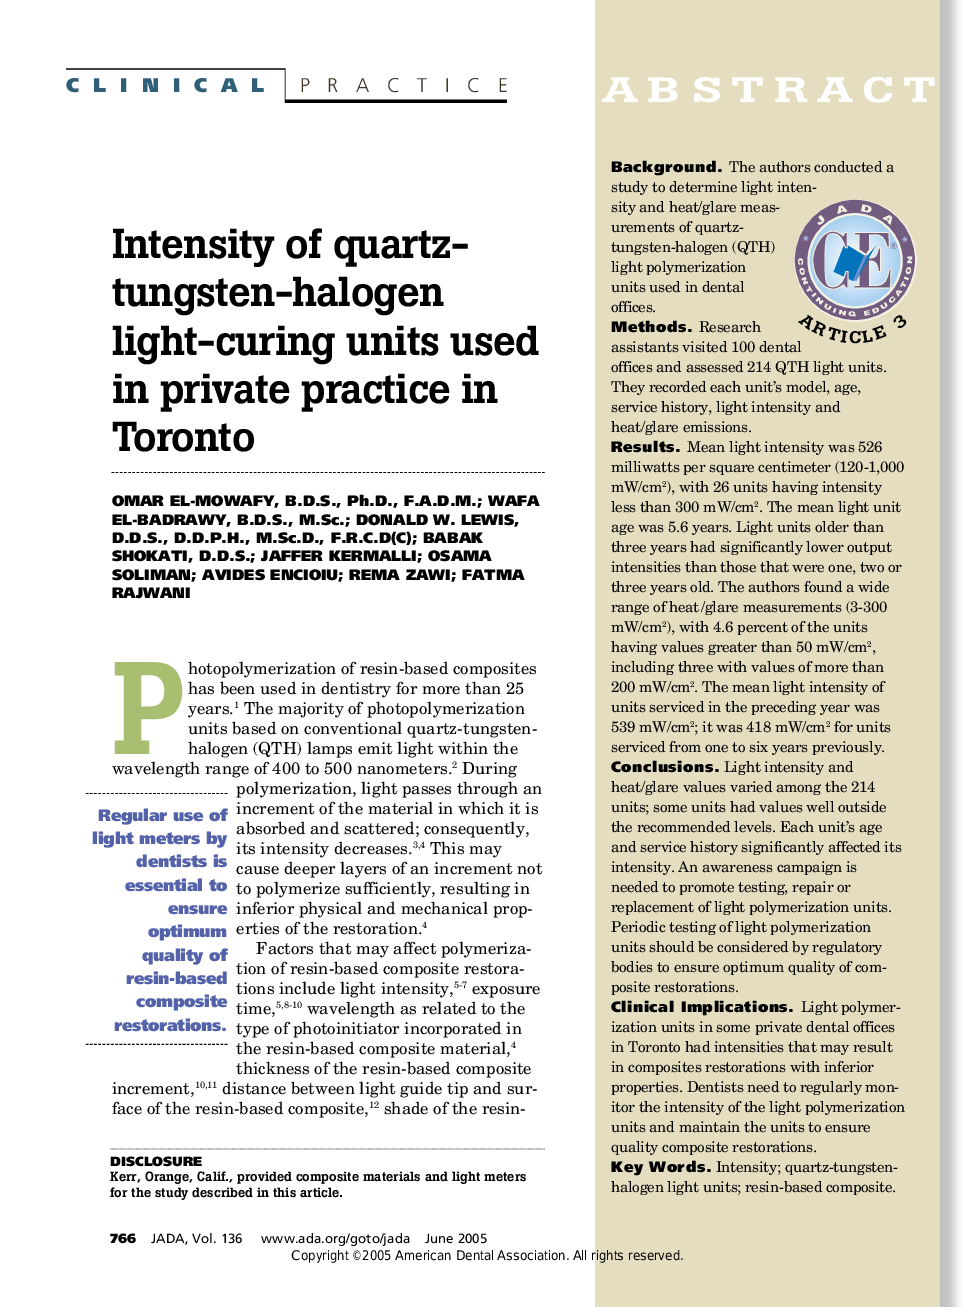 Intensity of quartz-tungsten-halogen light-curing units used in private practice in Toronto